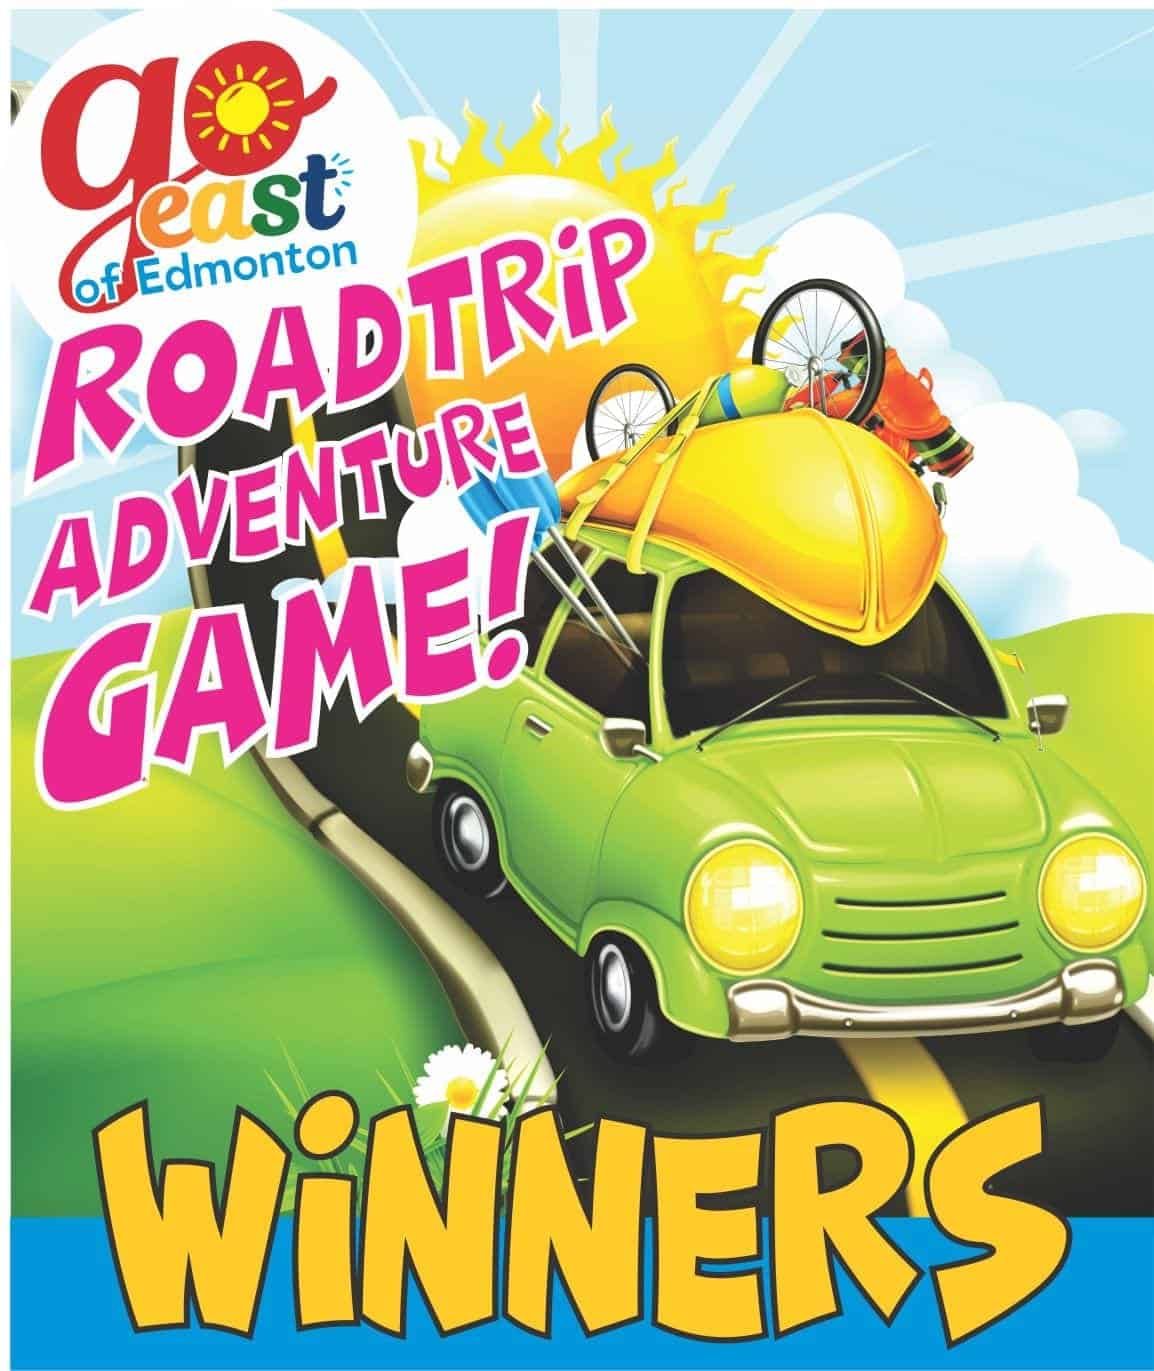 Featured Image for “Winners of the 2022 Go East of Edmonton Roadtrip Adventure Game”